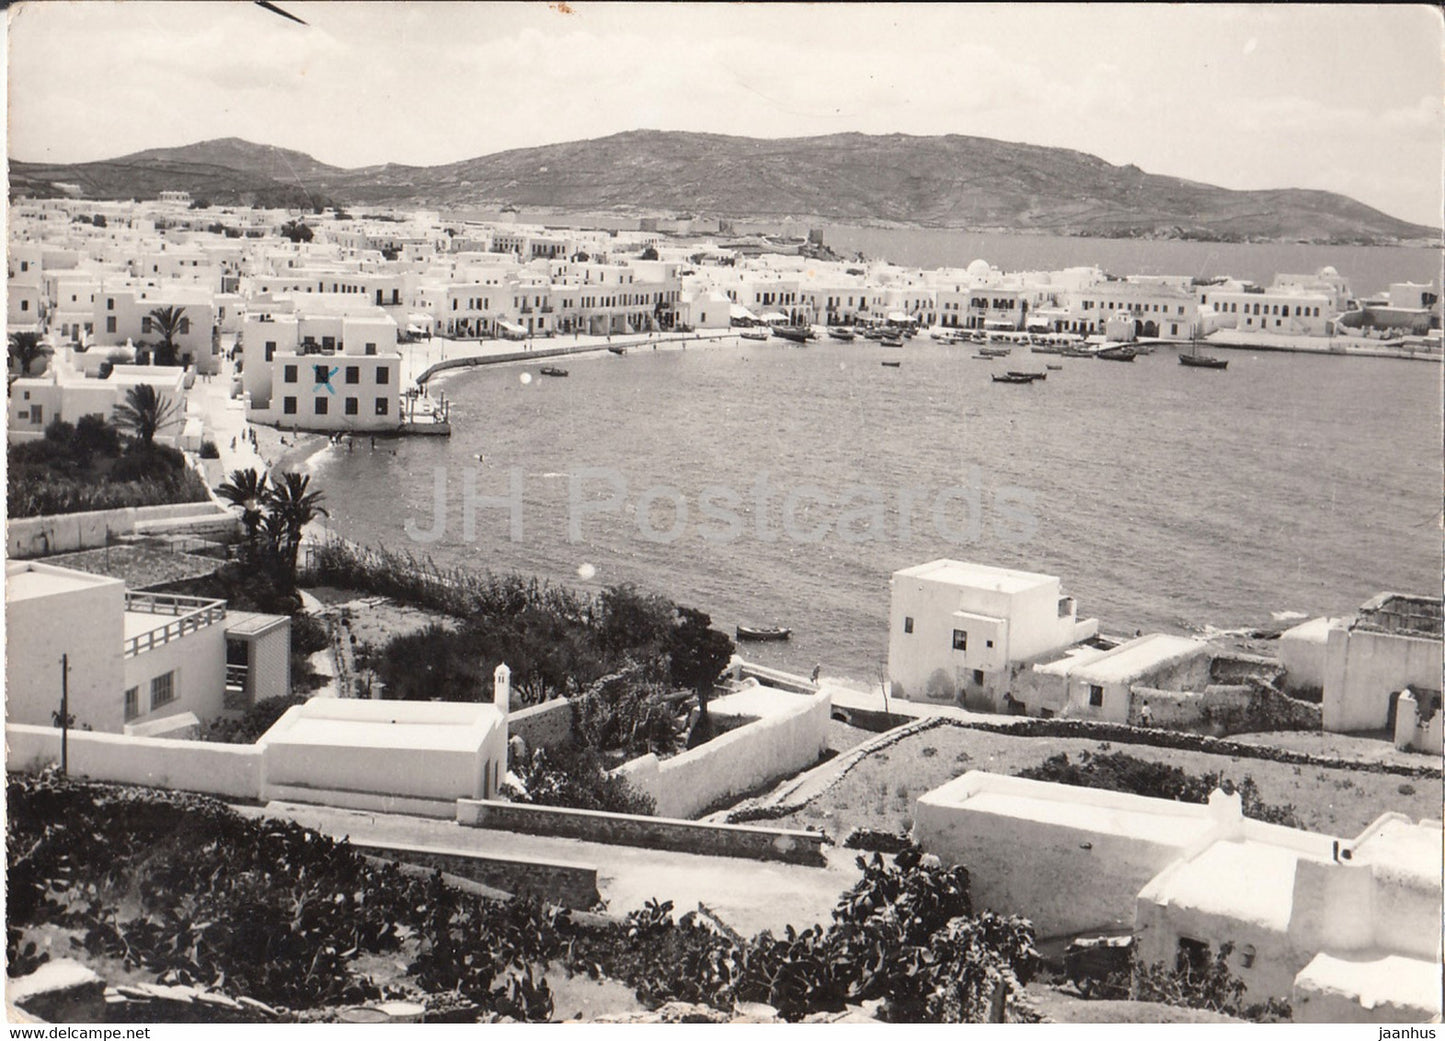 View of the Coast - sea - old postcard - 1959 - Greece - used - JH Postcards